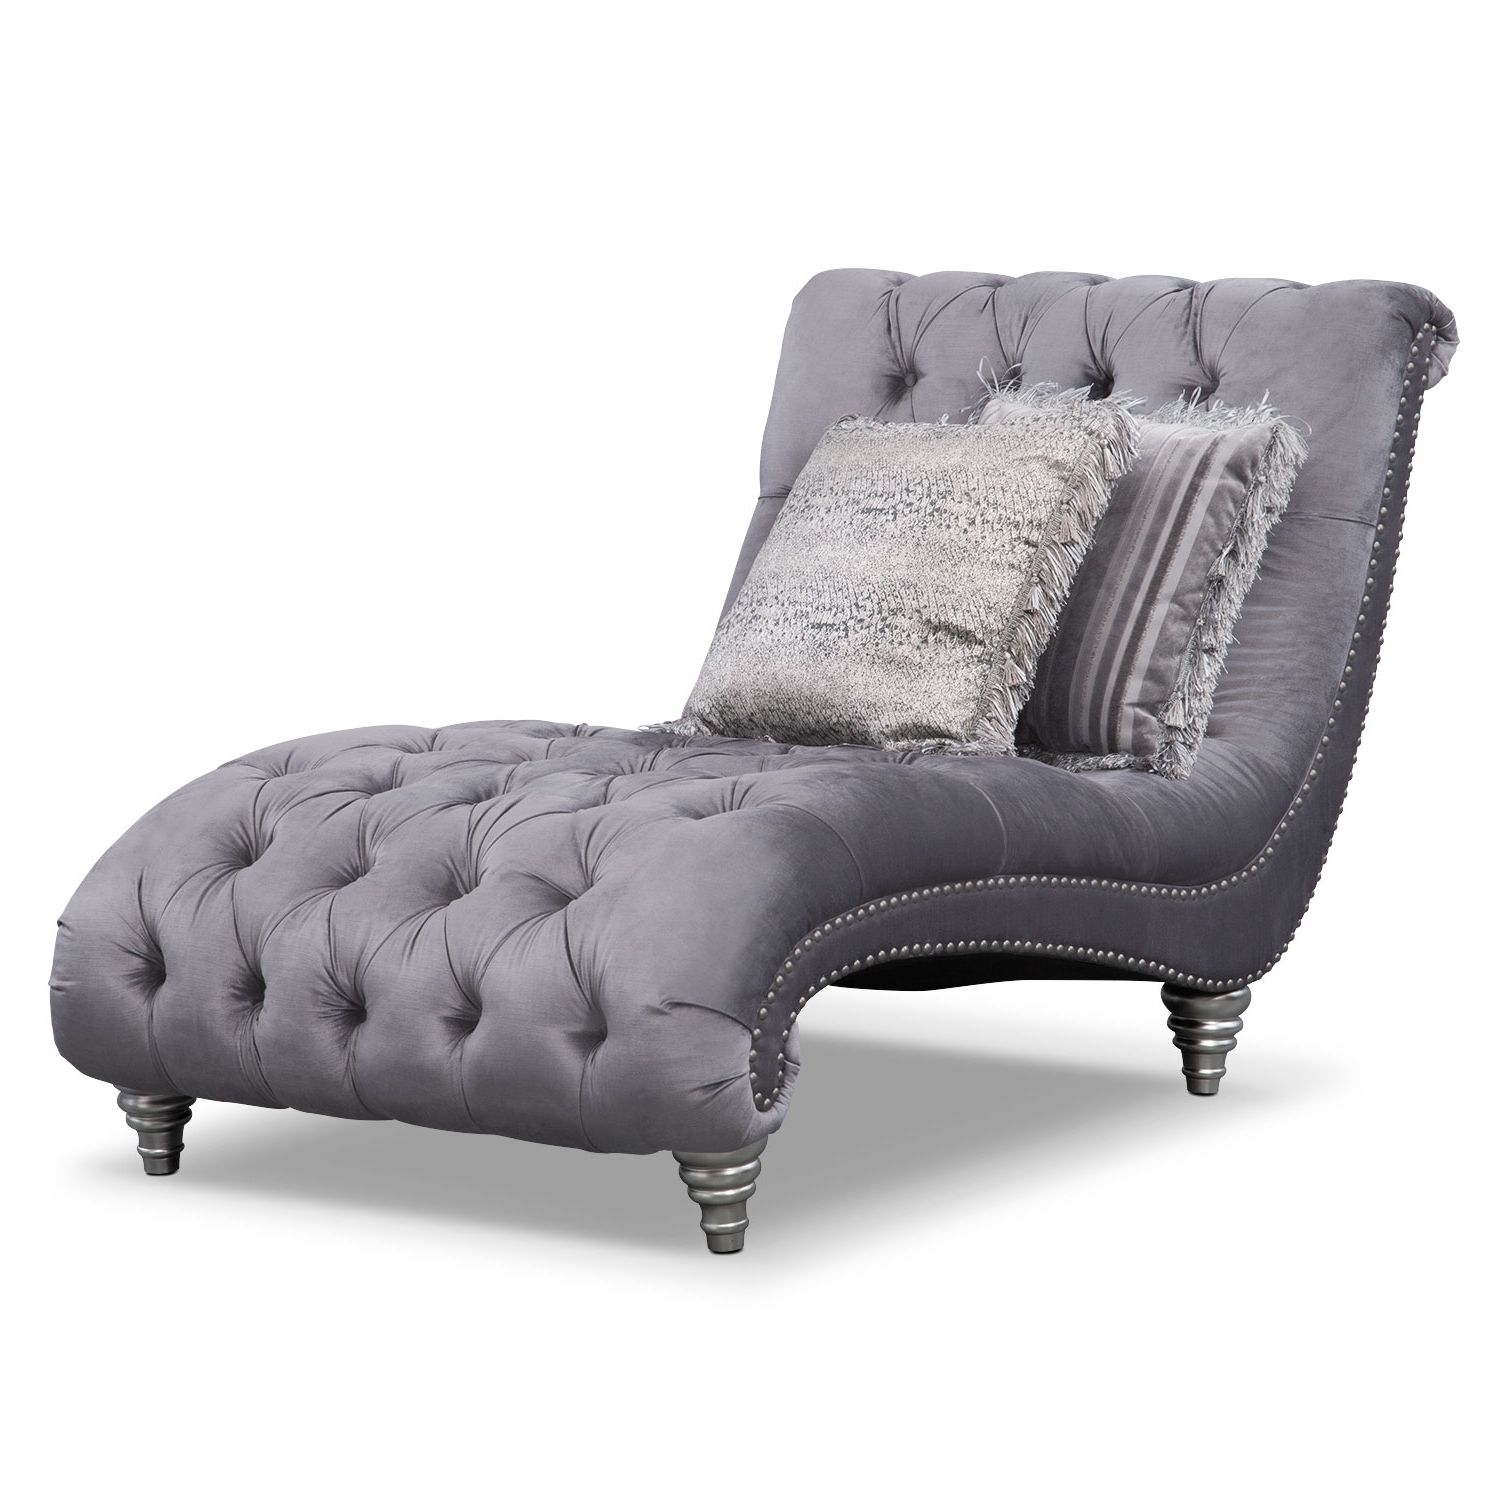 Favorite Cheap Chaise Lounges Regarding Gray Chaise Lounge – Gray Aluminum Chaise Lounge, Charcoal Gray (View 12 of 15)